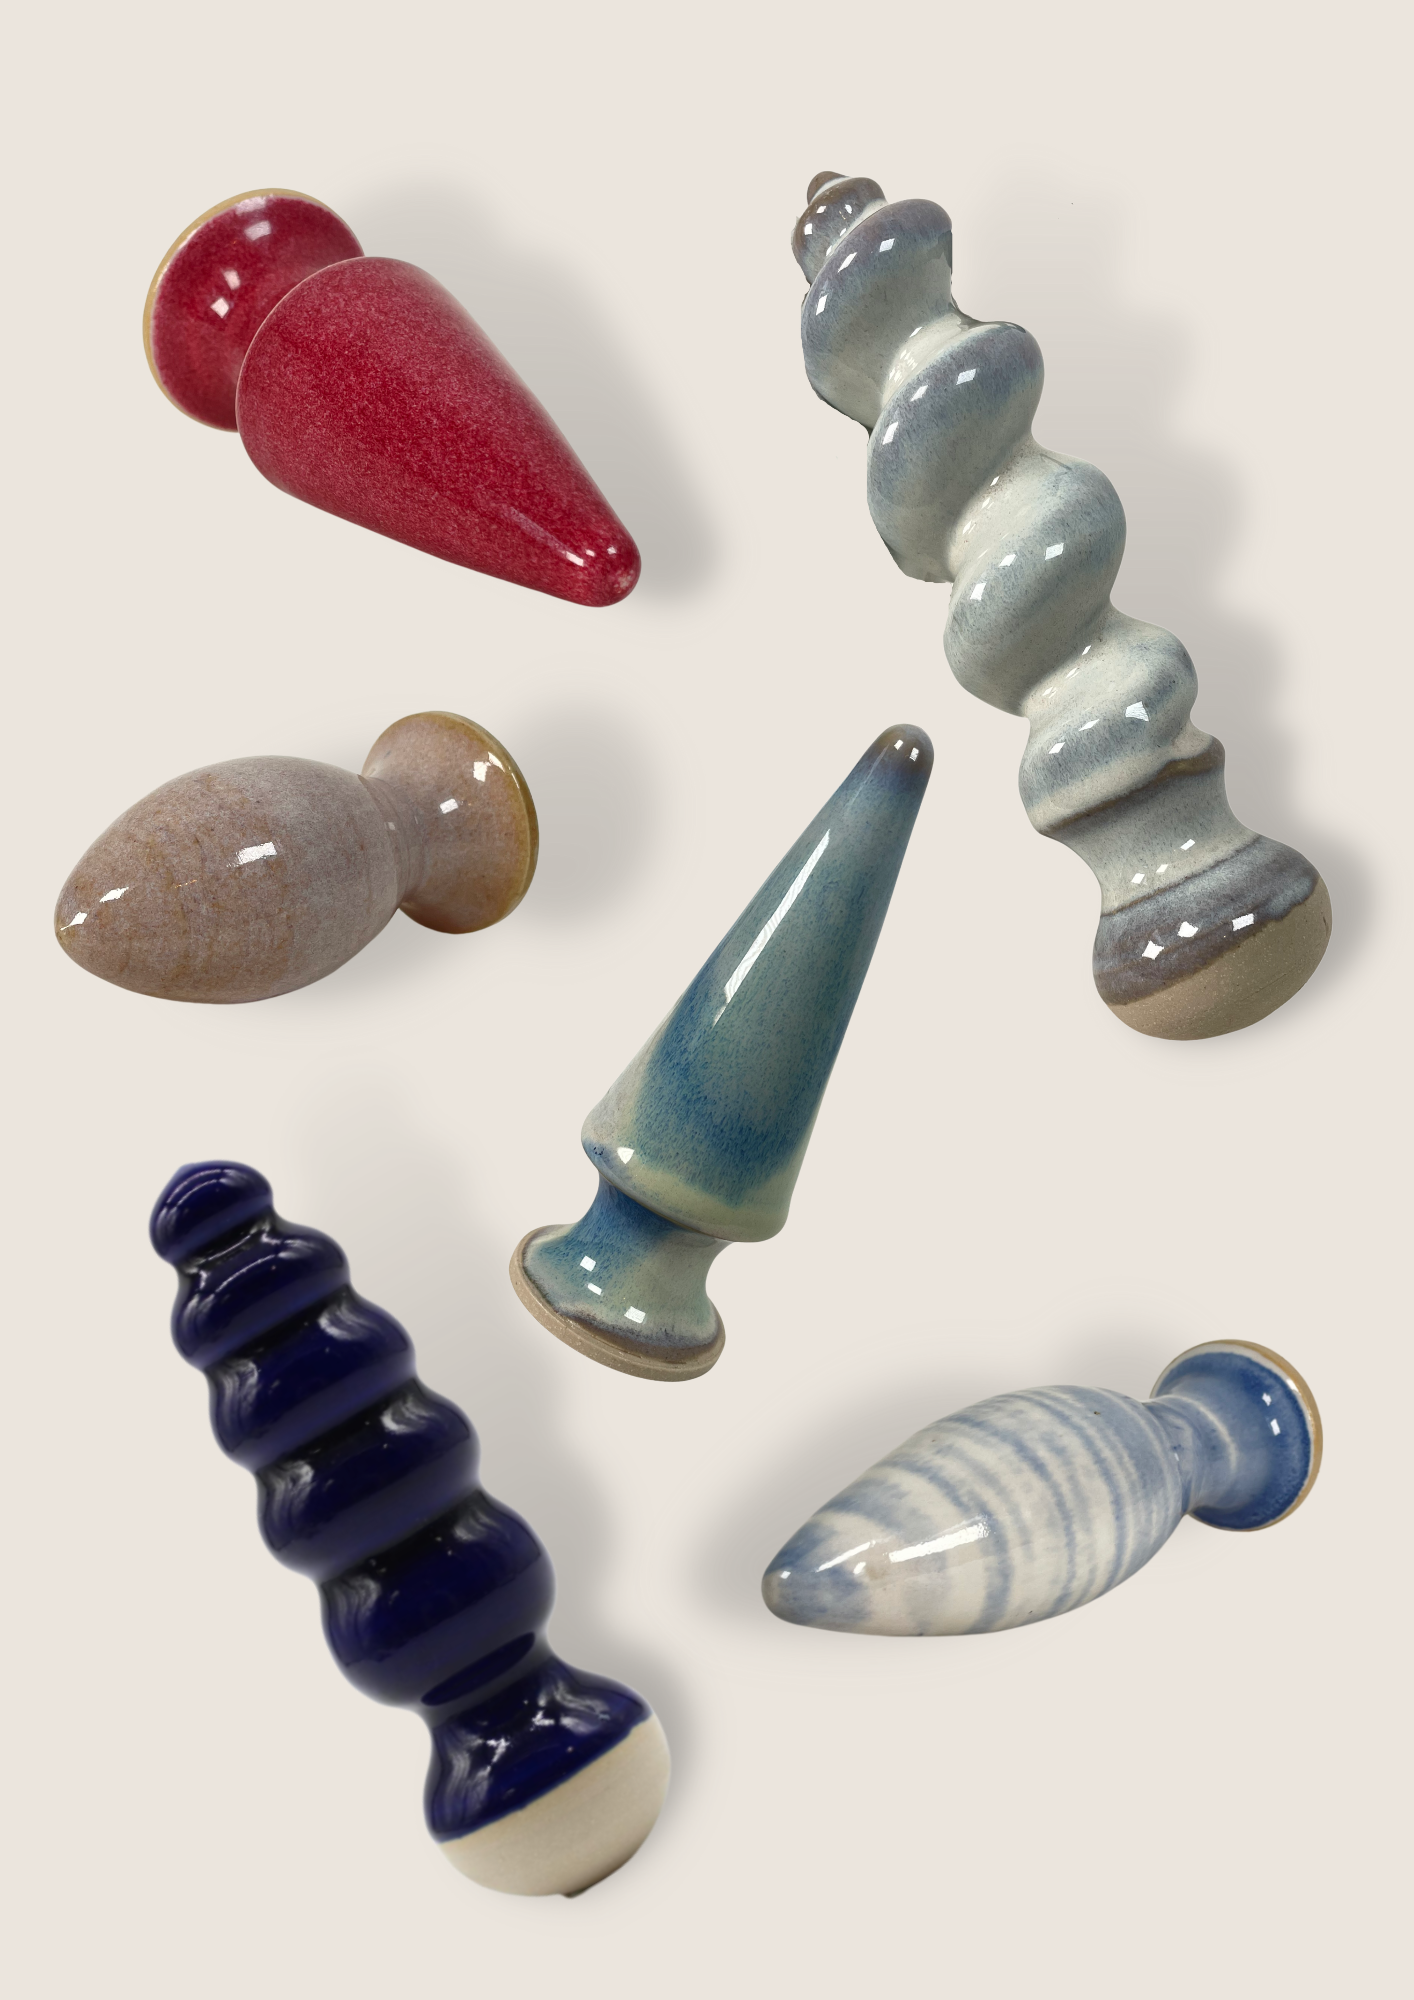 Please Yourself! With our BRAND NEW Sensual Ceramic Playthings...